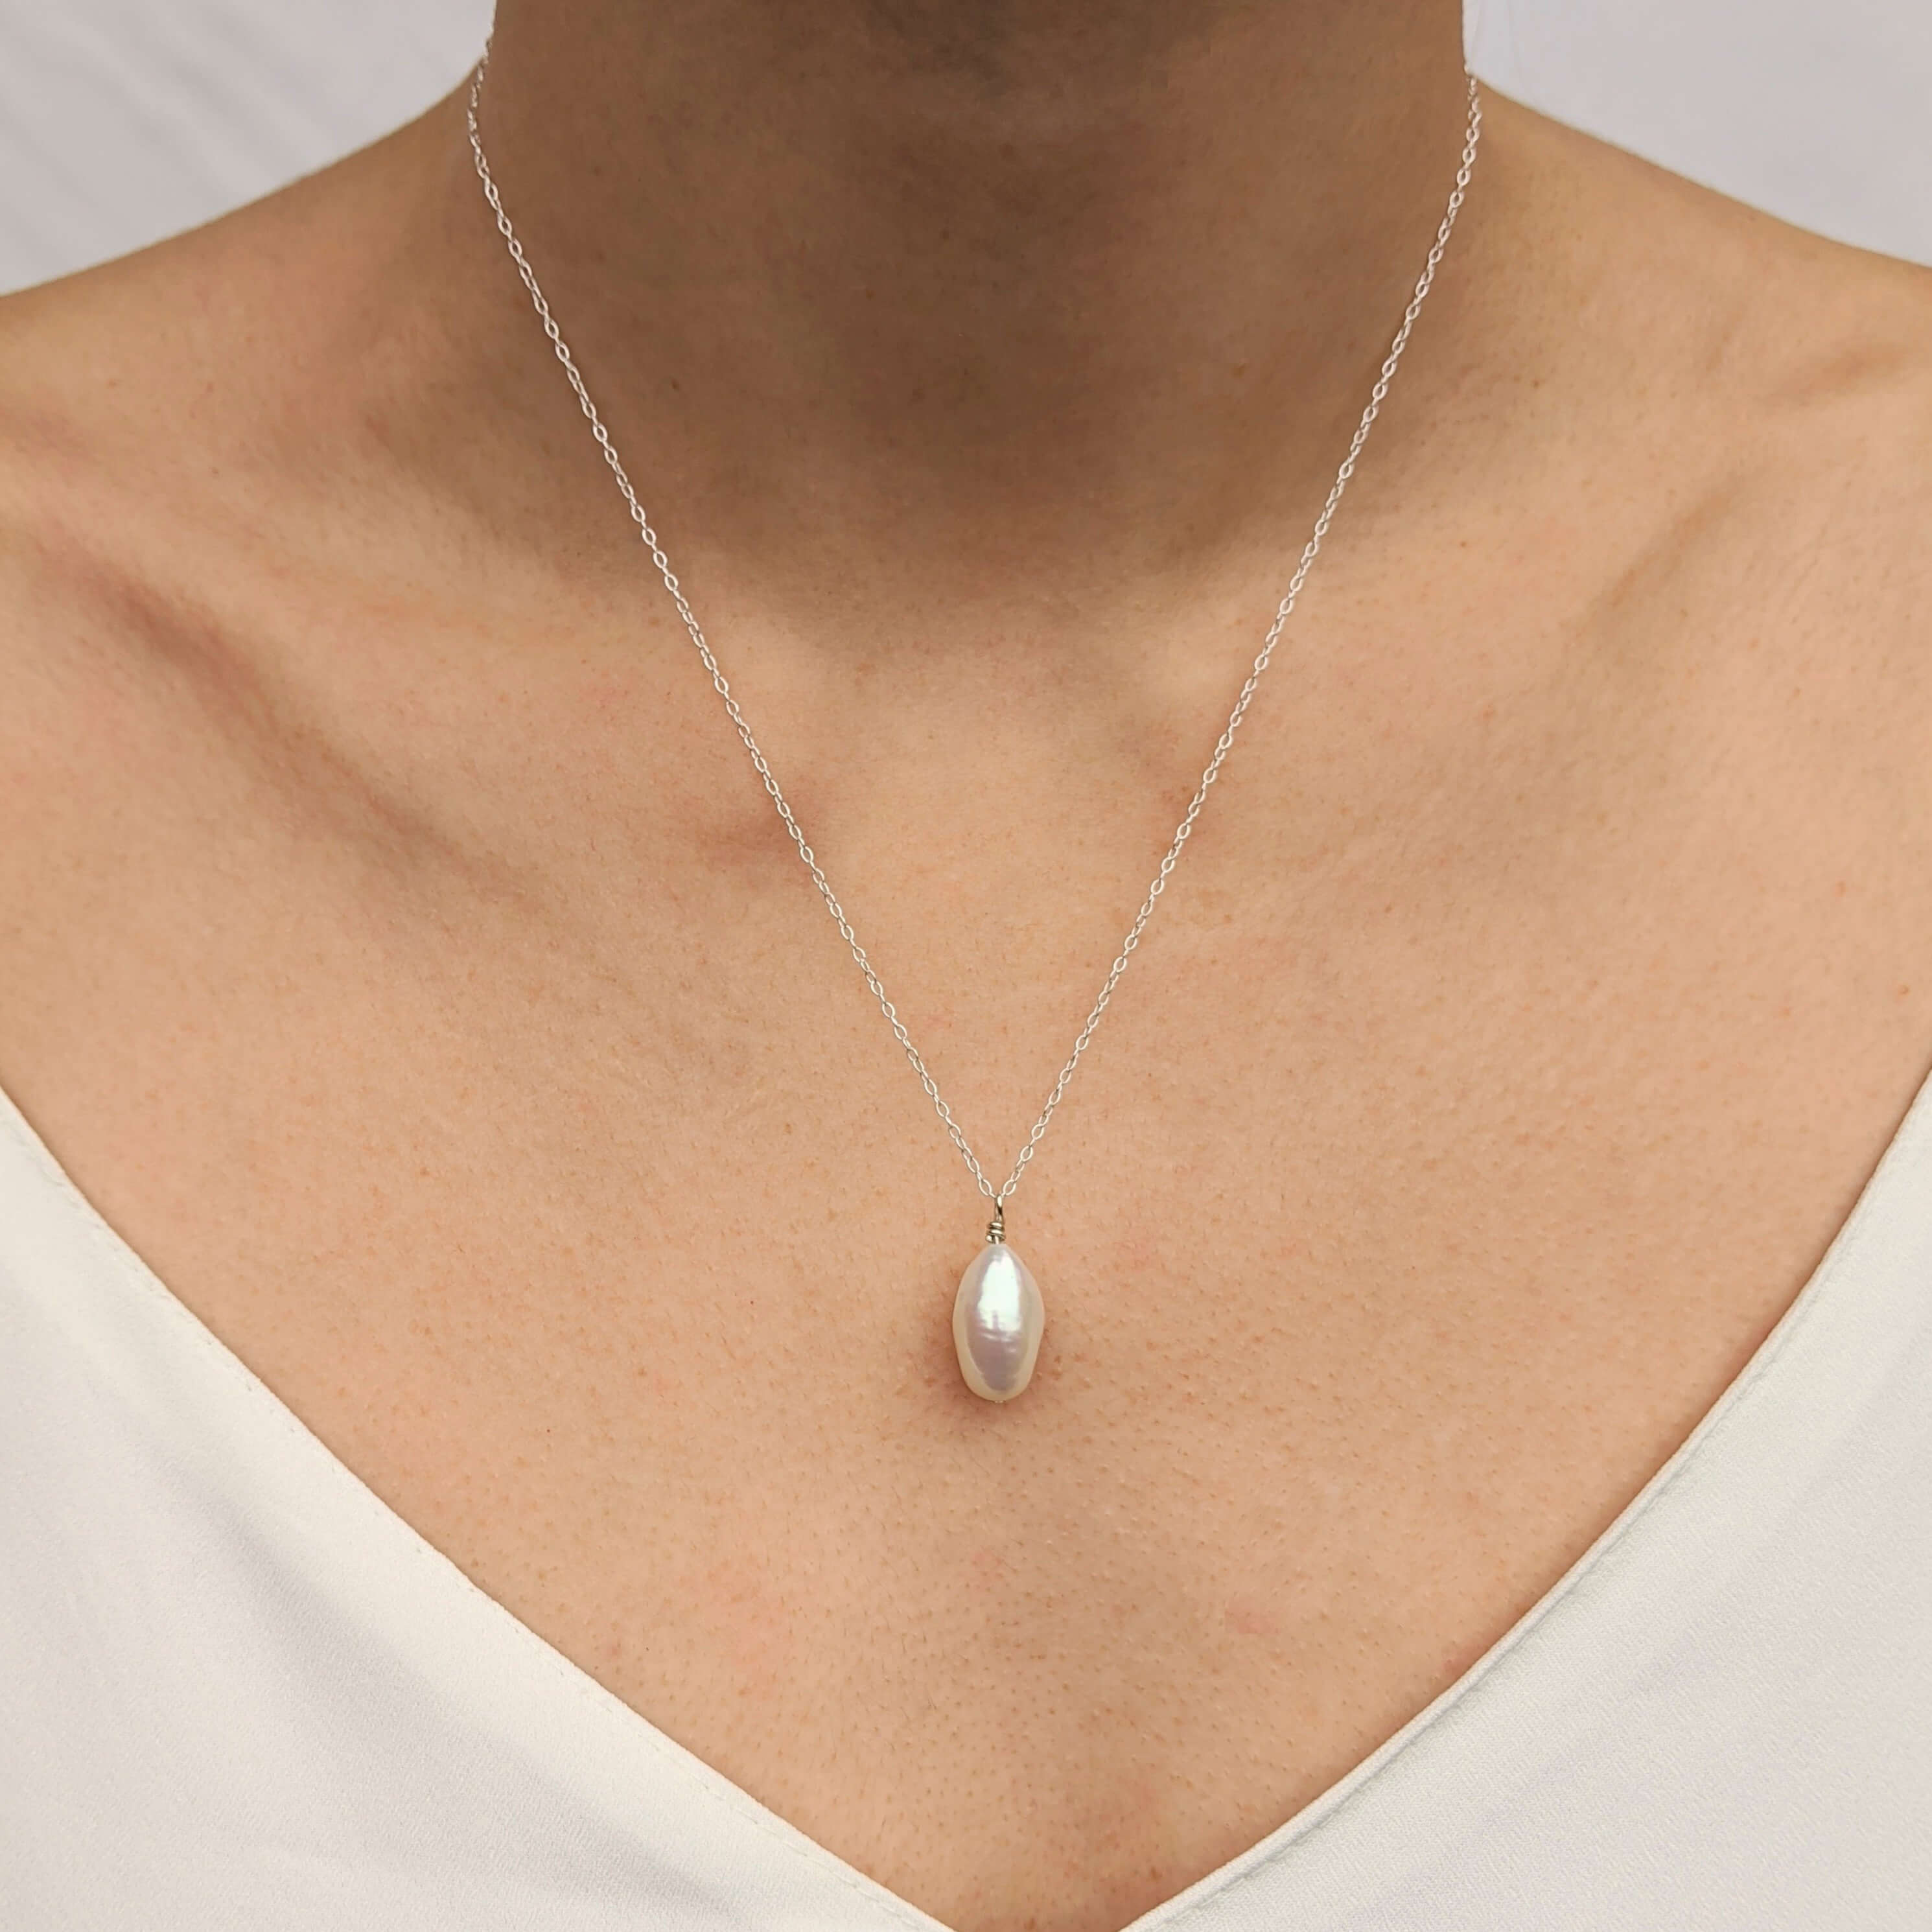 Model wearing sterling silver chain necklace with baroque pearl pendant